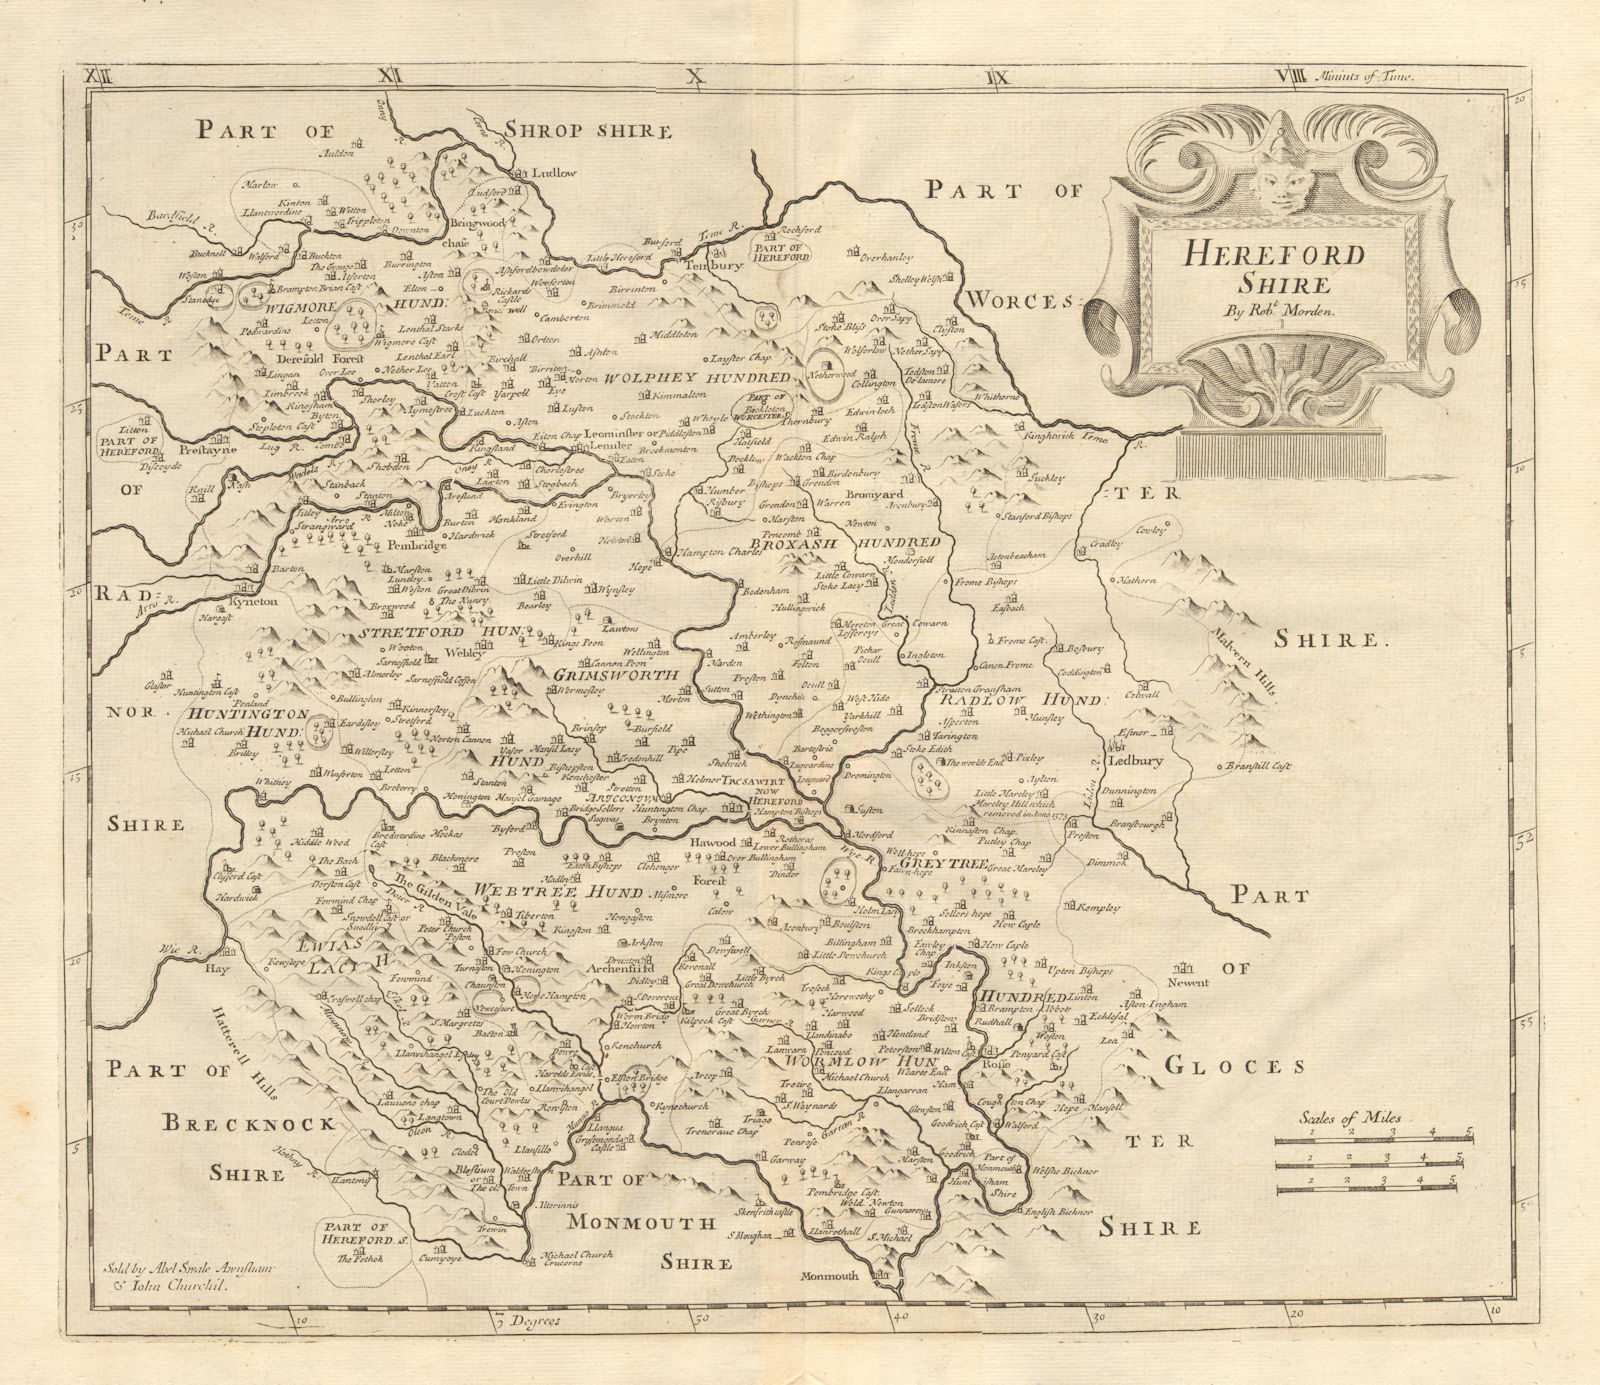 Herefordshire. 'HEREFORD SHIRE' by ROBERT MORDEN. Camden's Britannia 1772 map